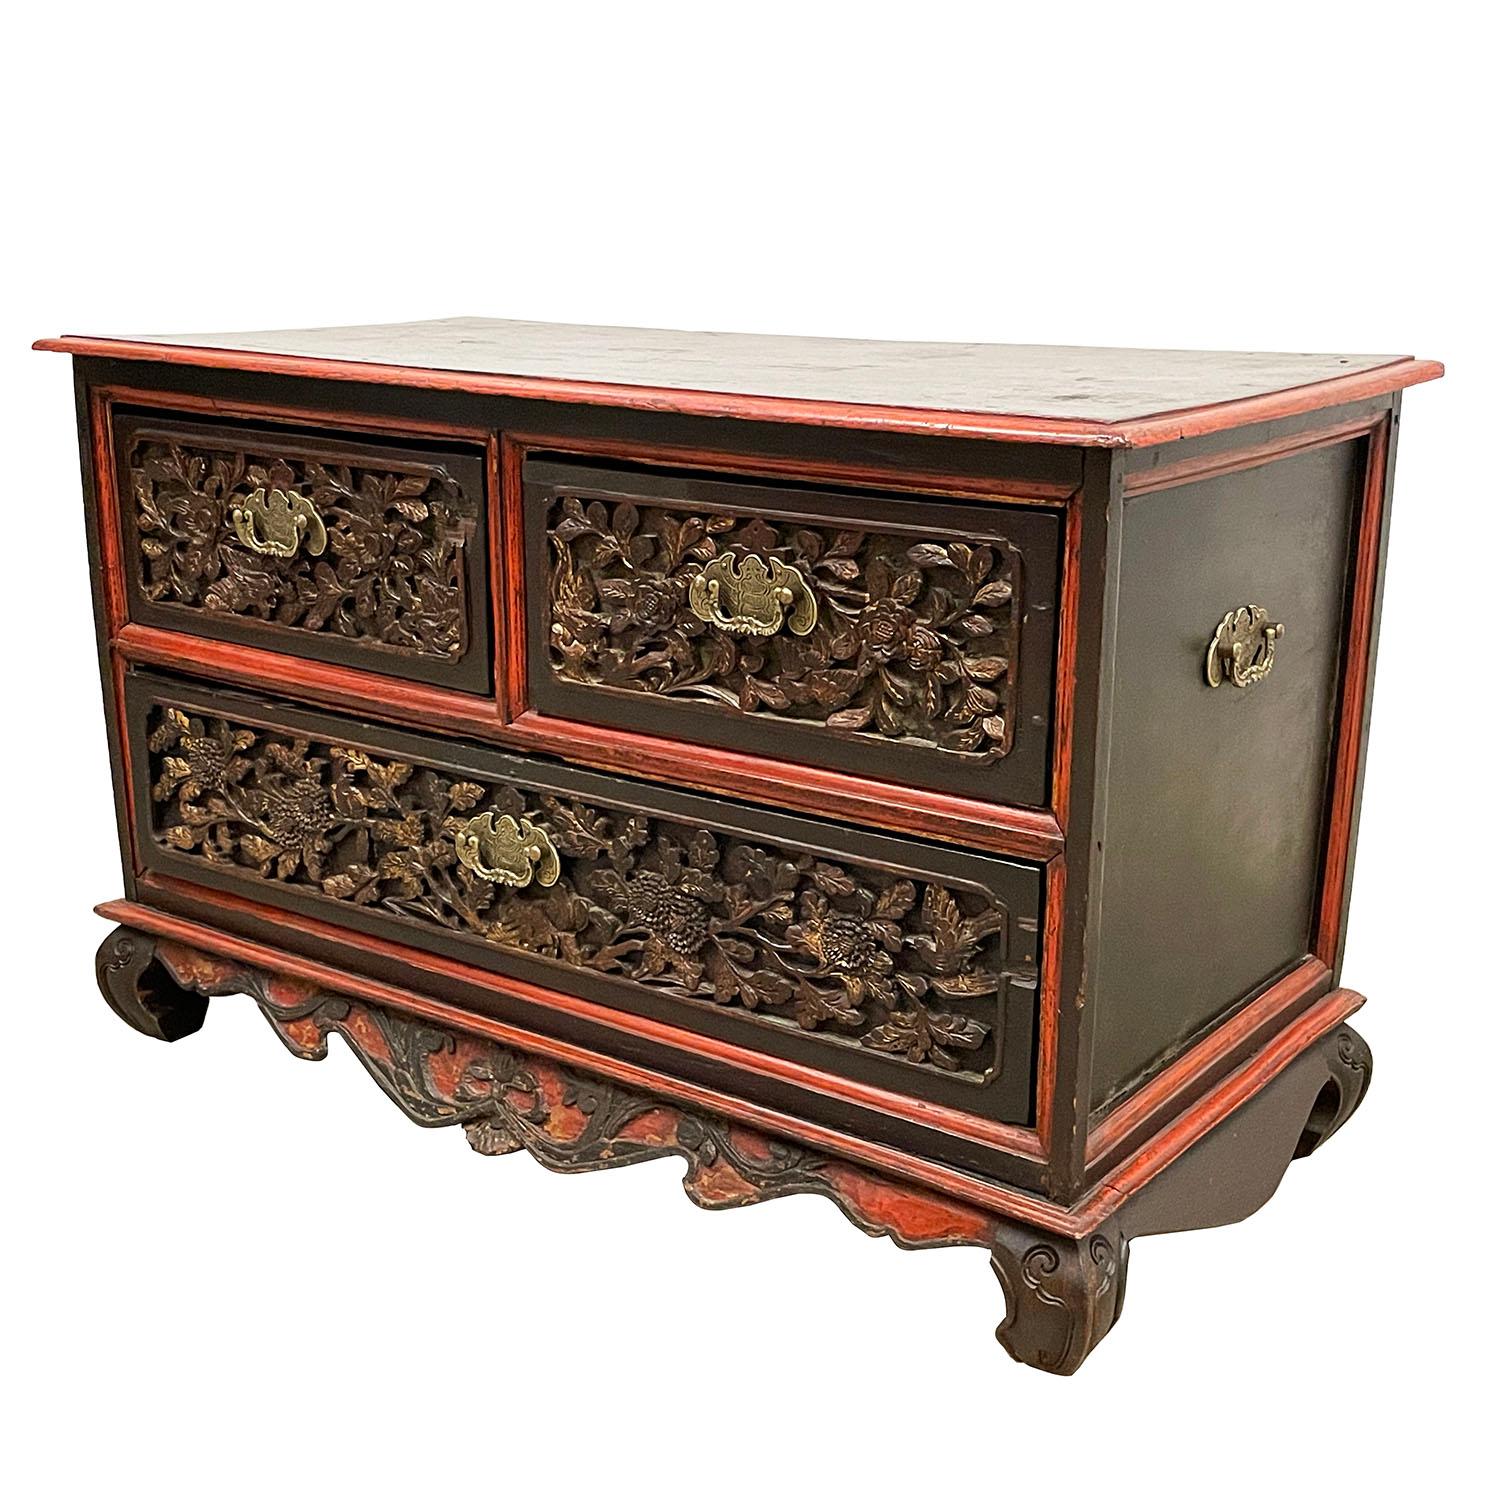 This beautiful coffee table has Chinese traditional massive carving works of floral design and highlighted with gilt on the front. This coffee table made from solid teak wood and has two small drawers on the top and a large drawer on the bottom with